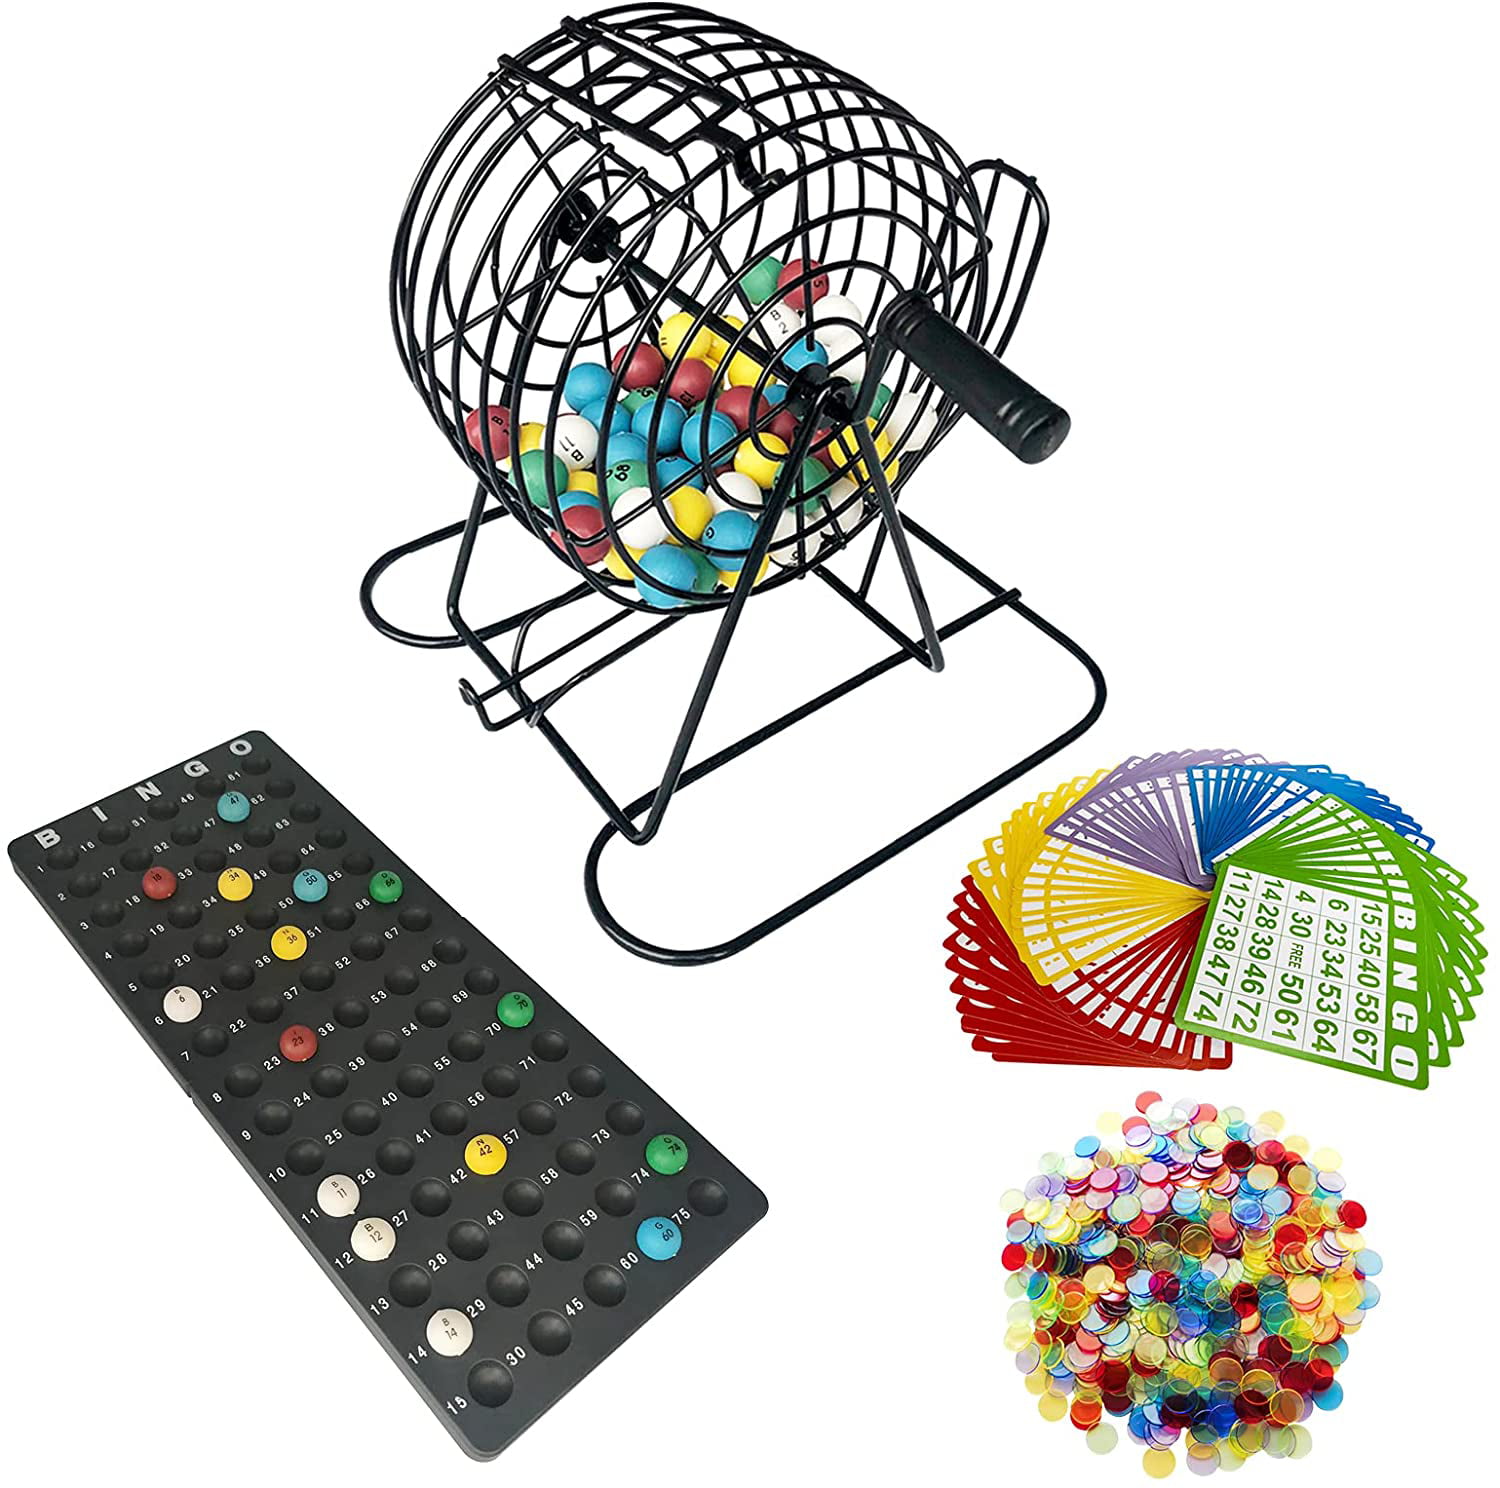 Deluxe Royal Bingo Game With Colored Balls Chips,Cards,6" Cage and Instructions 